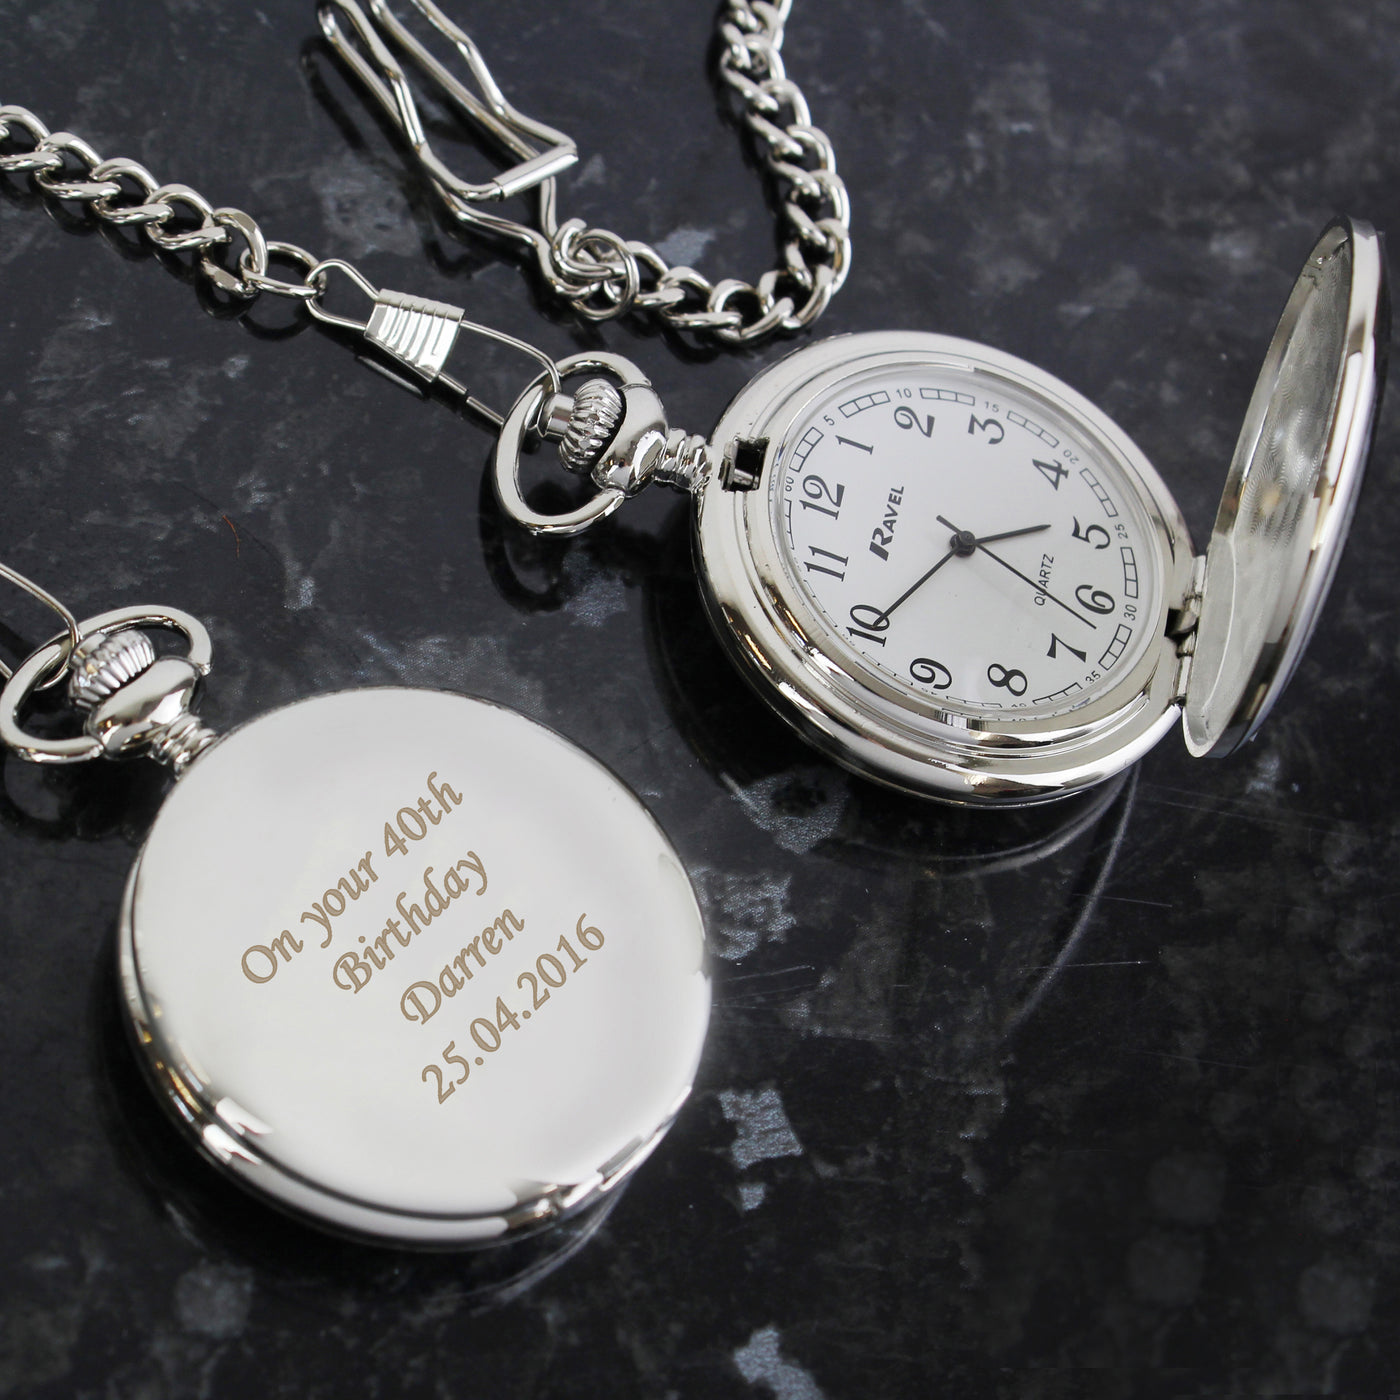 Personalised Pocket Fob Watch - TwoBeeps.co.uk